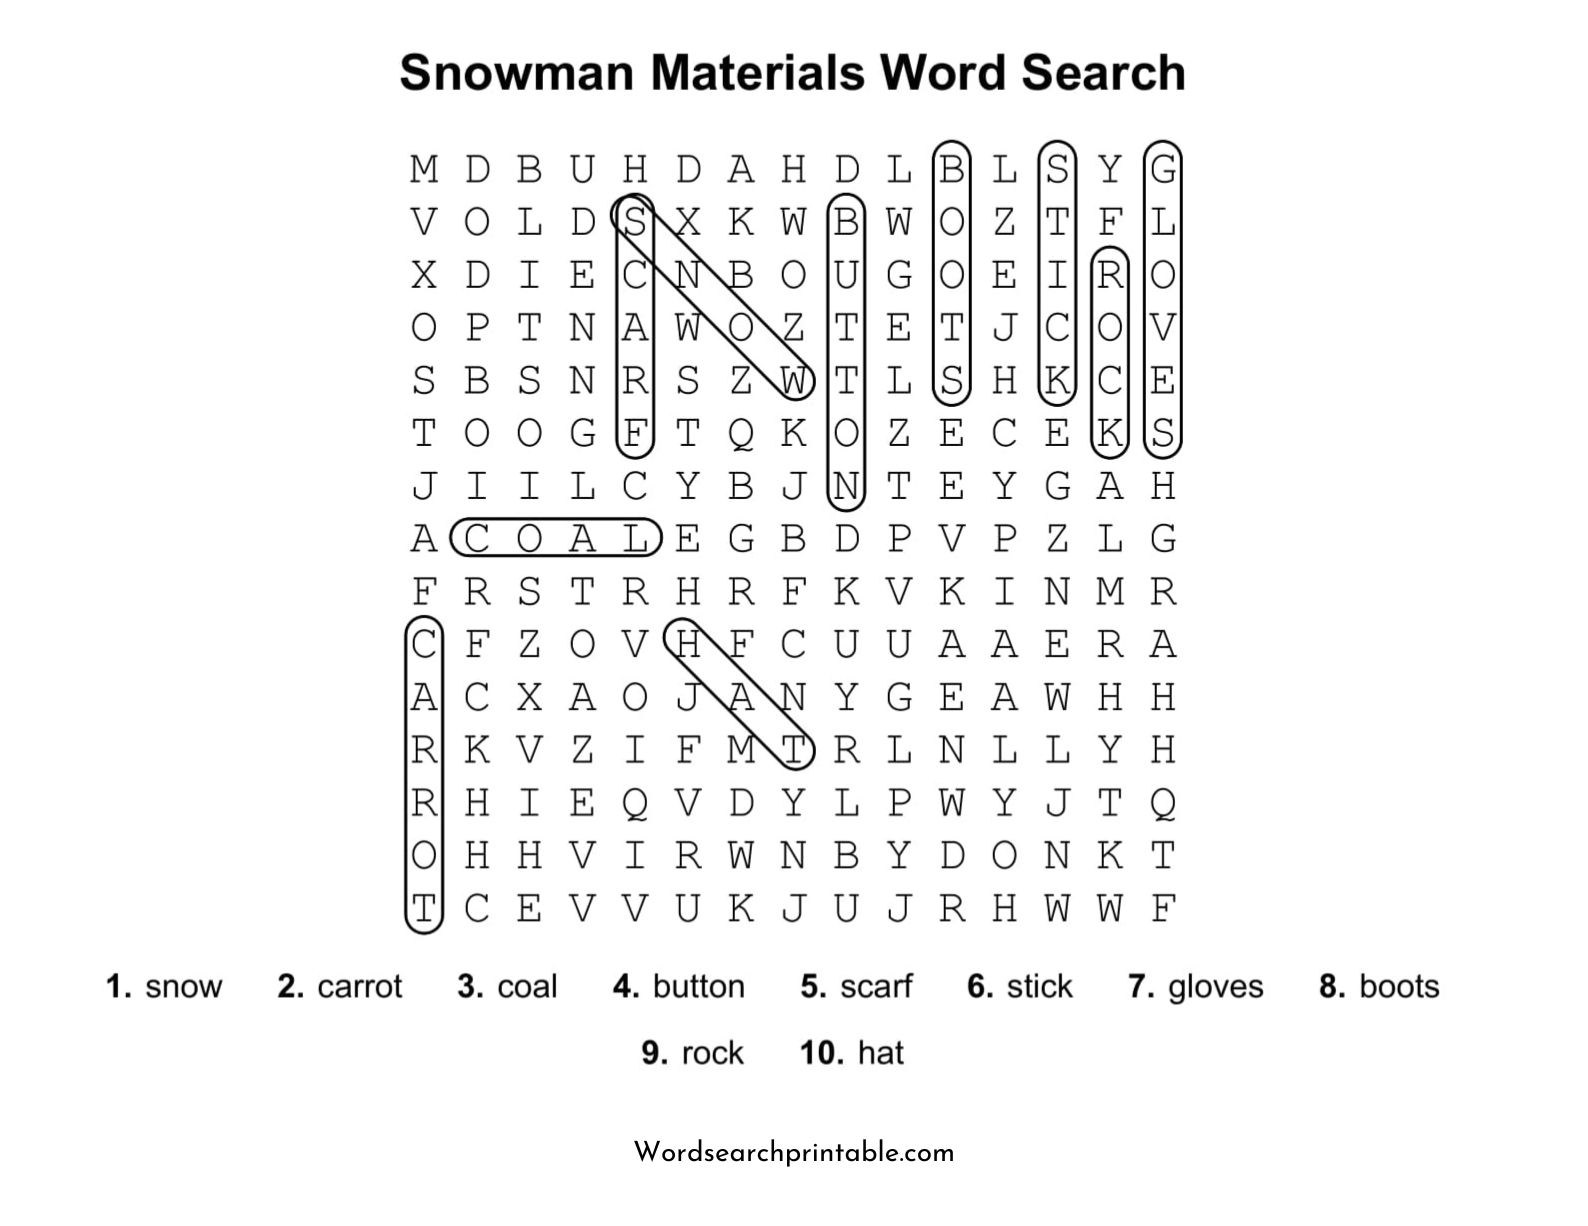 snowman materials word search puzzle solution